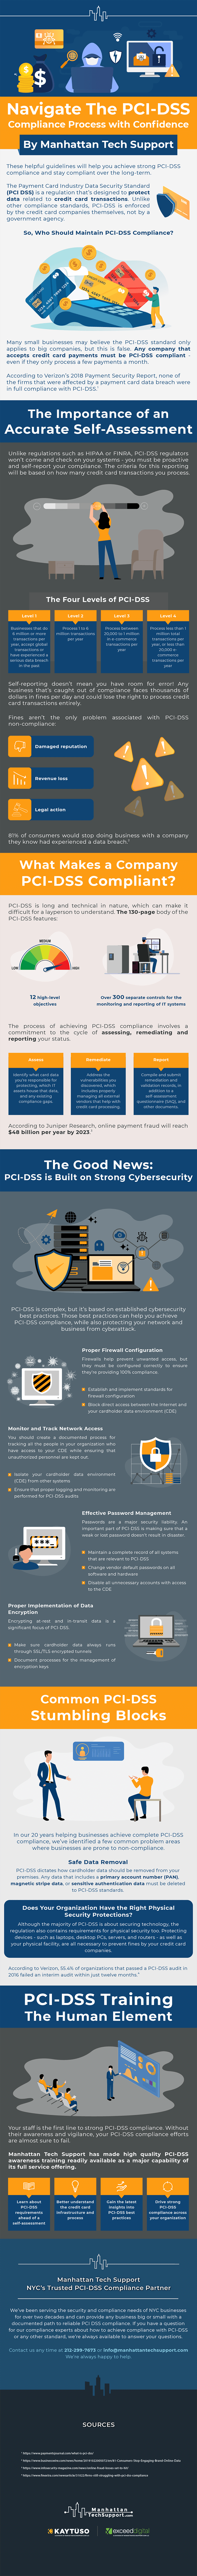 PCI DSS infographic